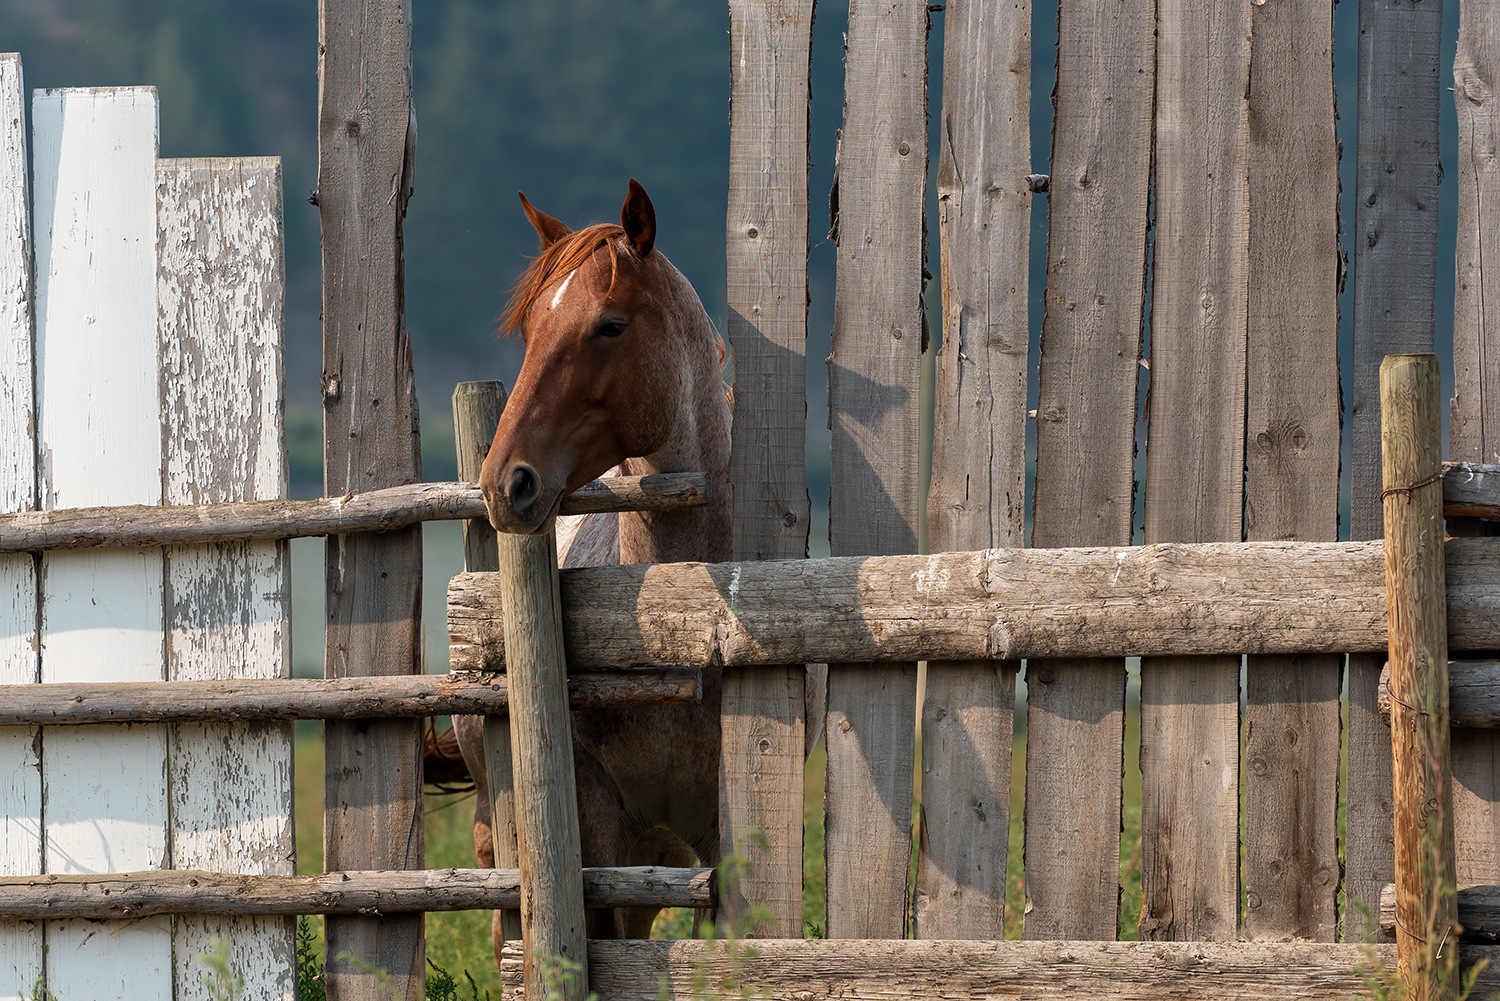 Kamloops Fauna horse sticking head through wooden fence